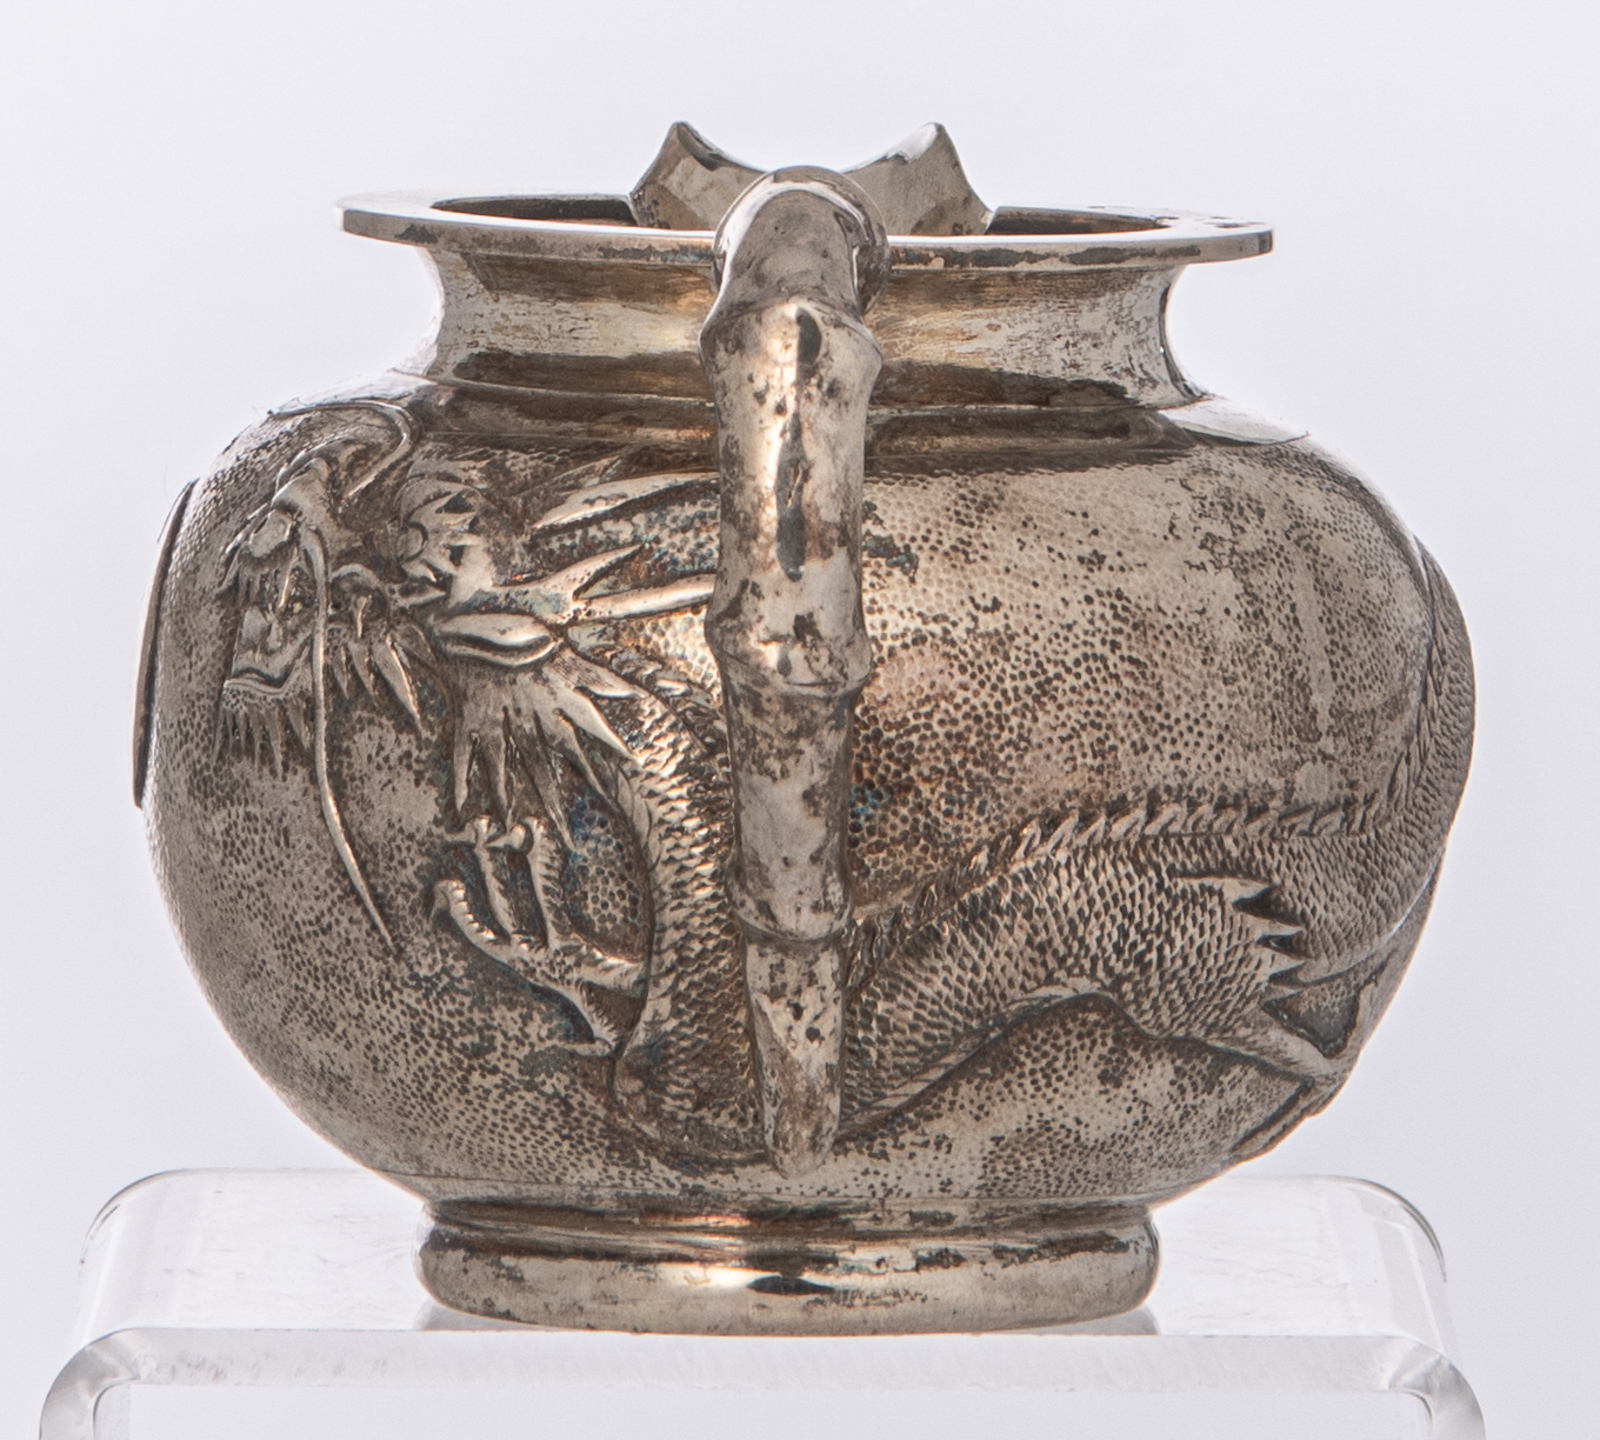 A Chinese three-piece silver tea set with dragon design, marked 'Yok Sang', Shanghai, H 4,5 - W 25,5 - Image 11 of 19